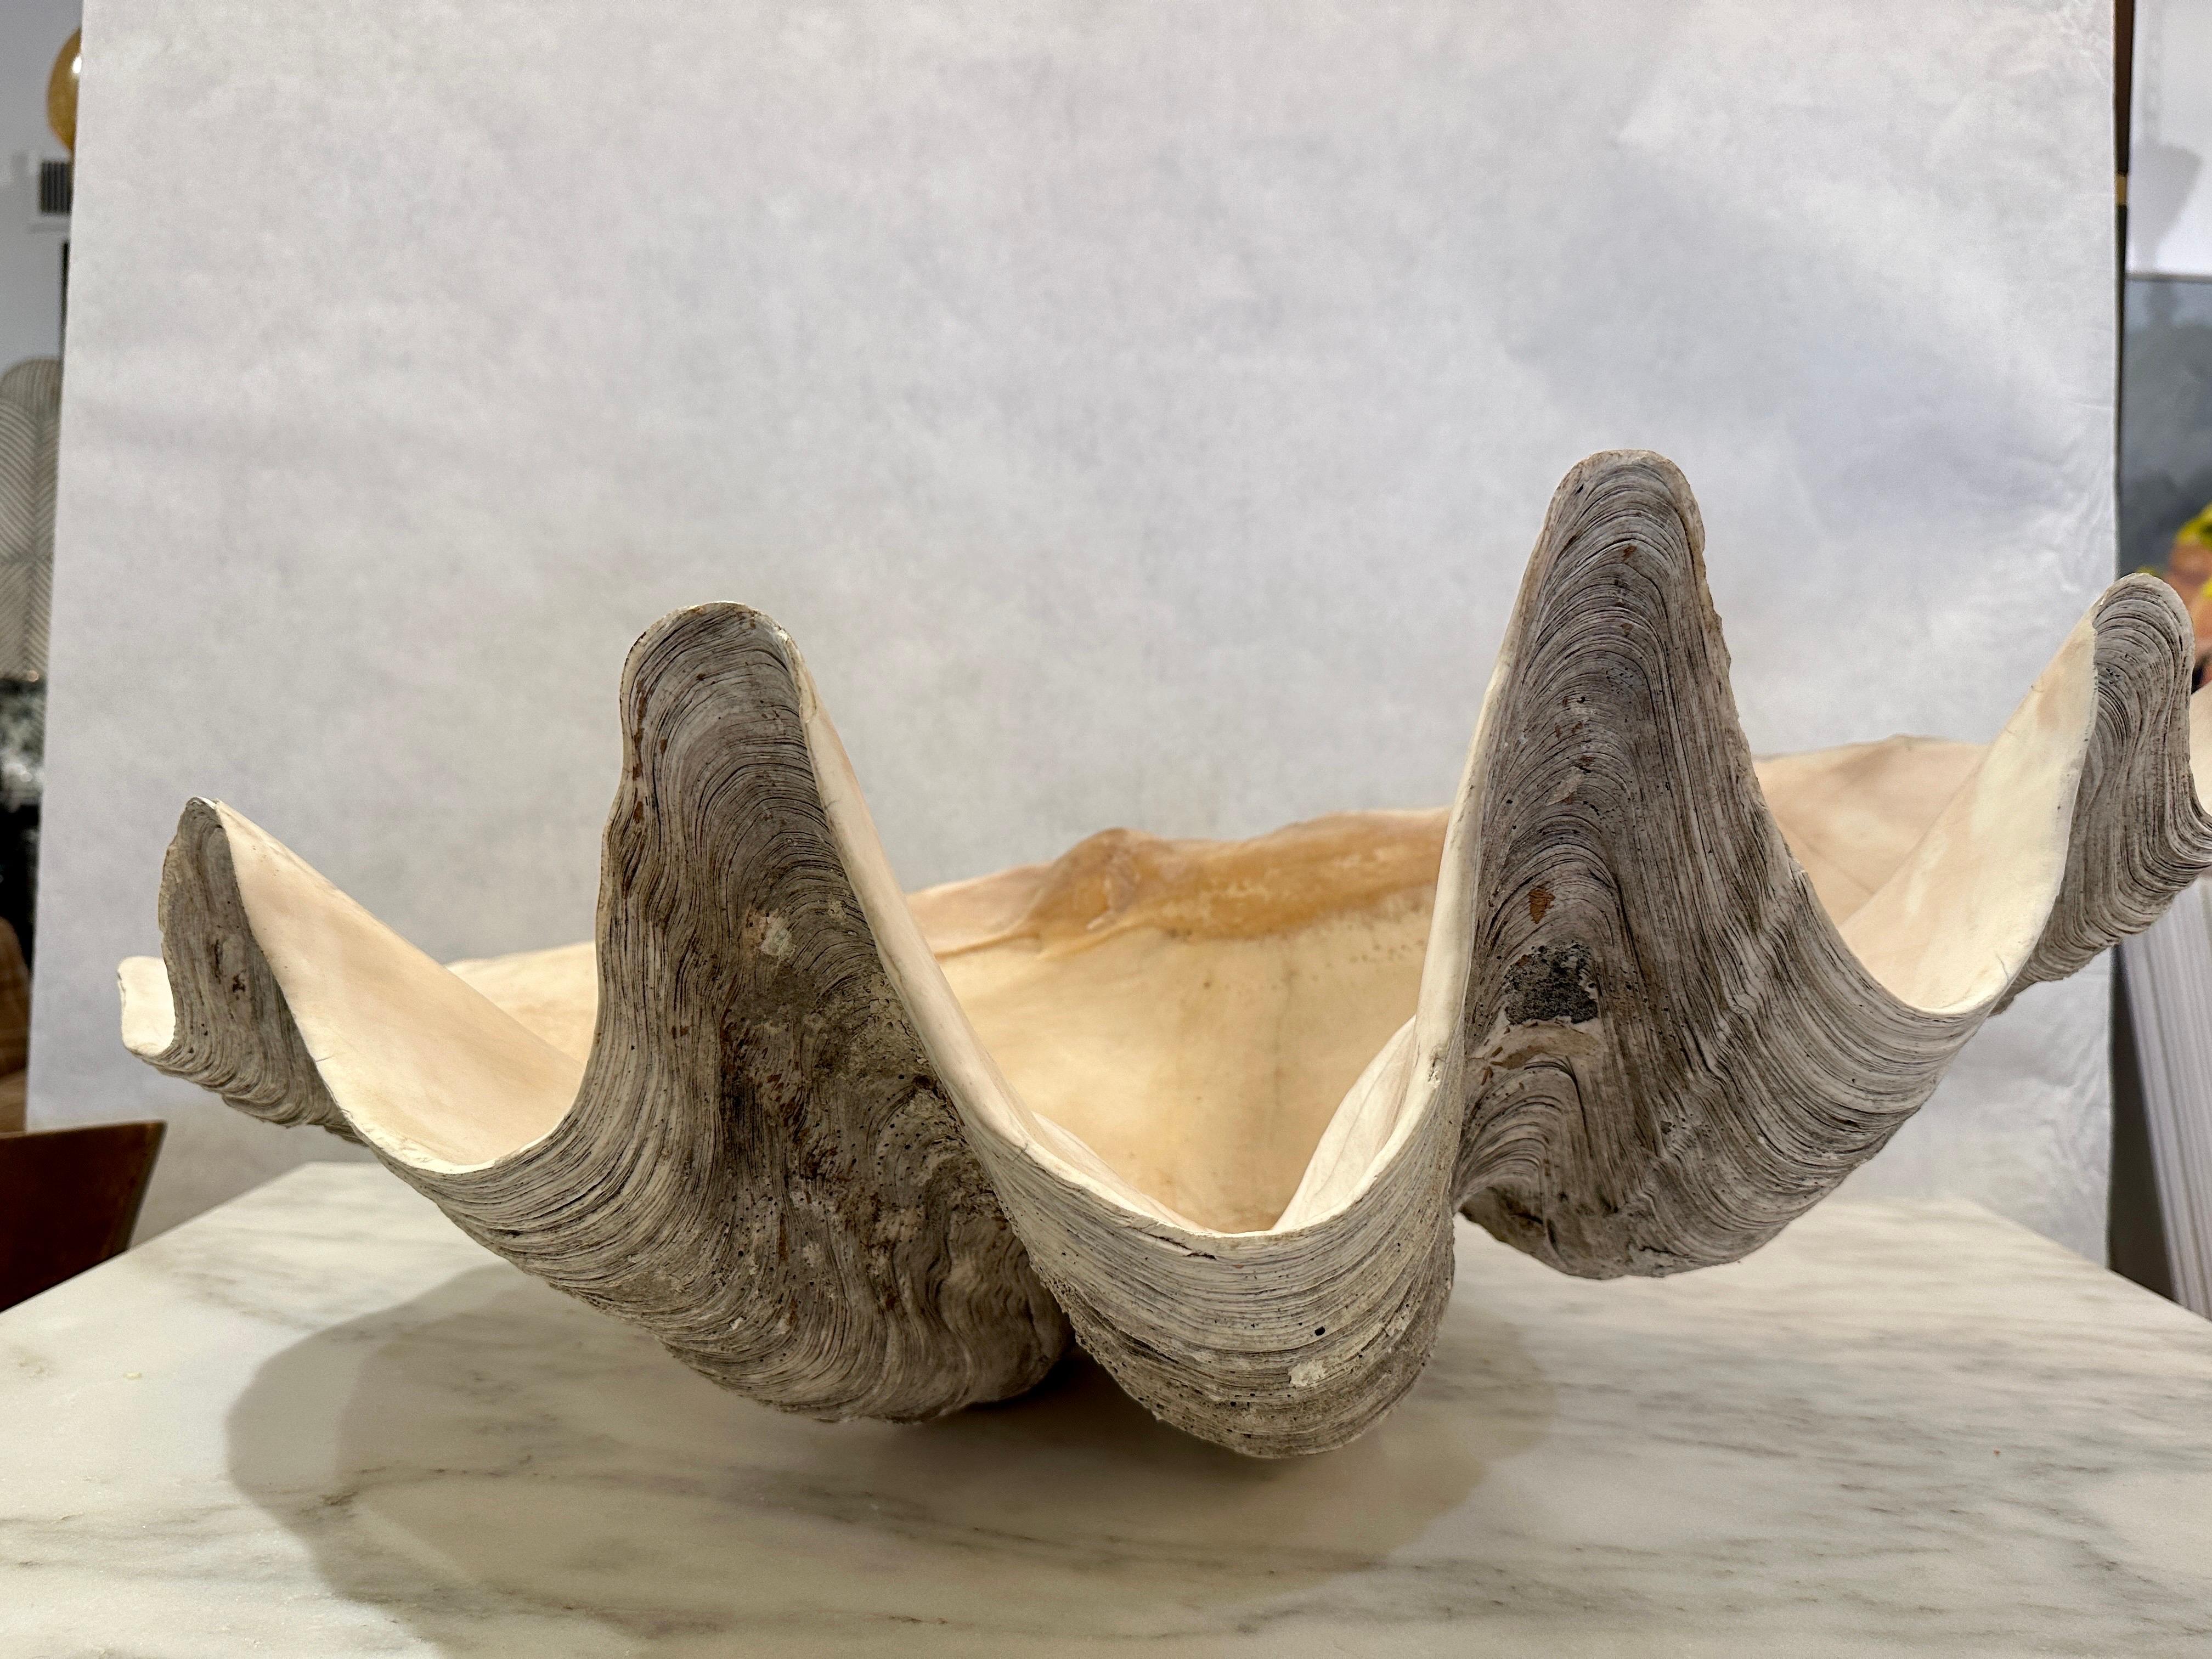 This giant Pacific clam shell is all natural and with wonderful details.  THIS ITEM IS LOCATED AND WILL SHIP FROM OUR MIAMI, FLORIDA SHOWROOM.

